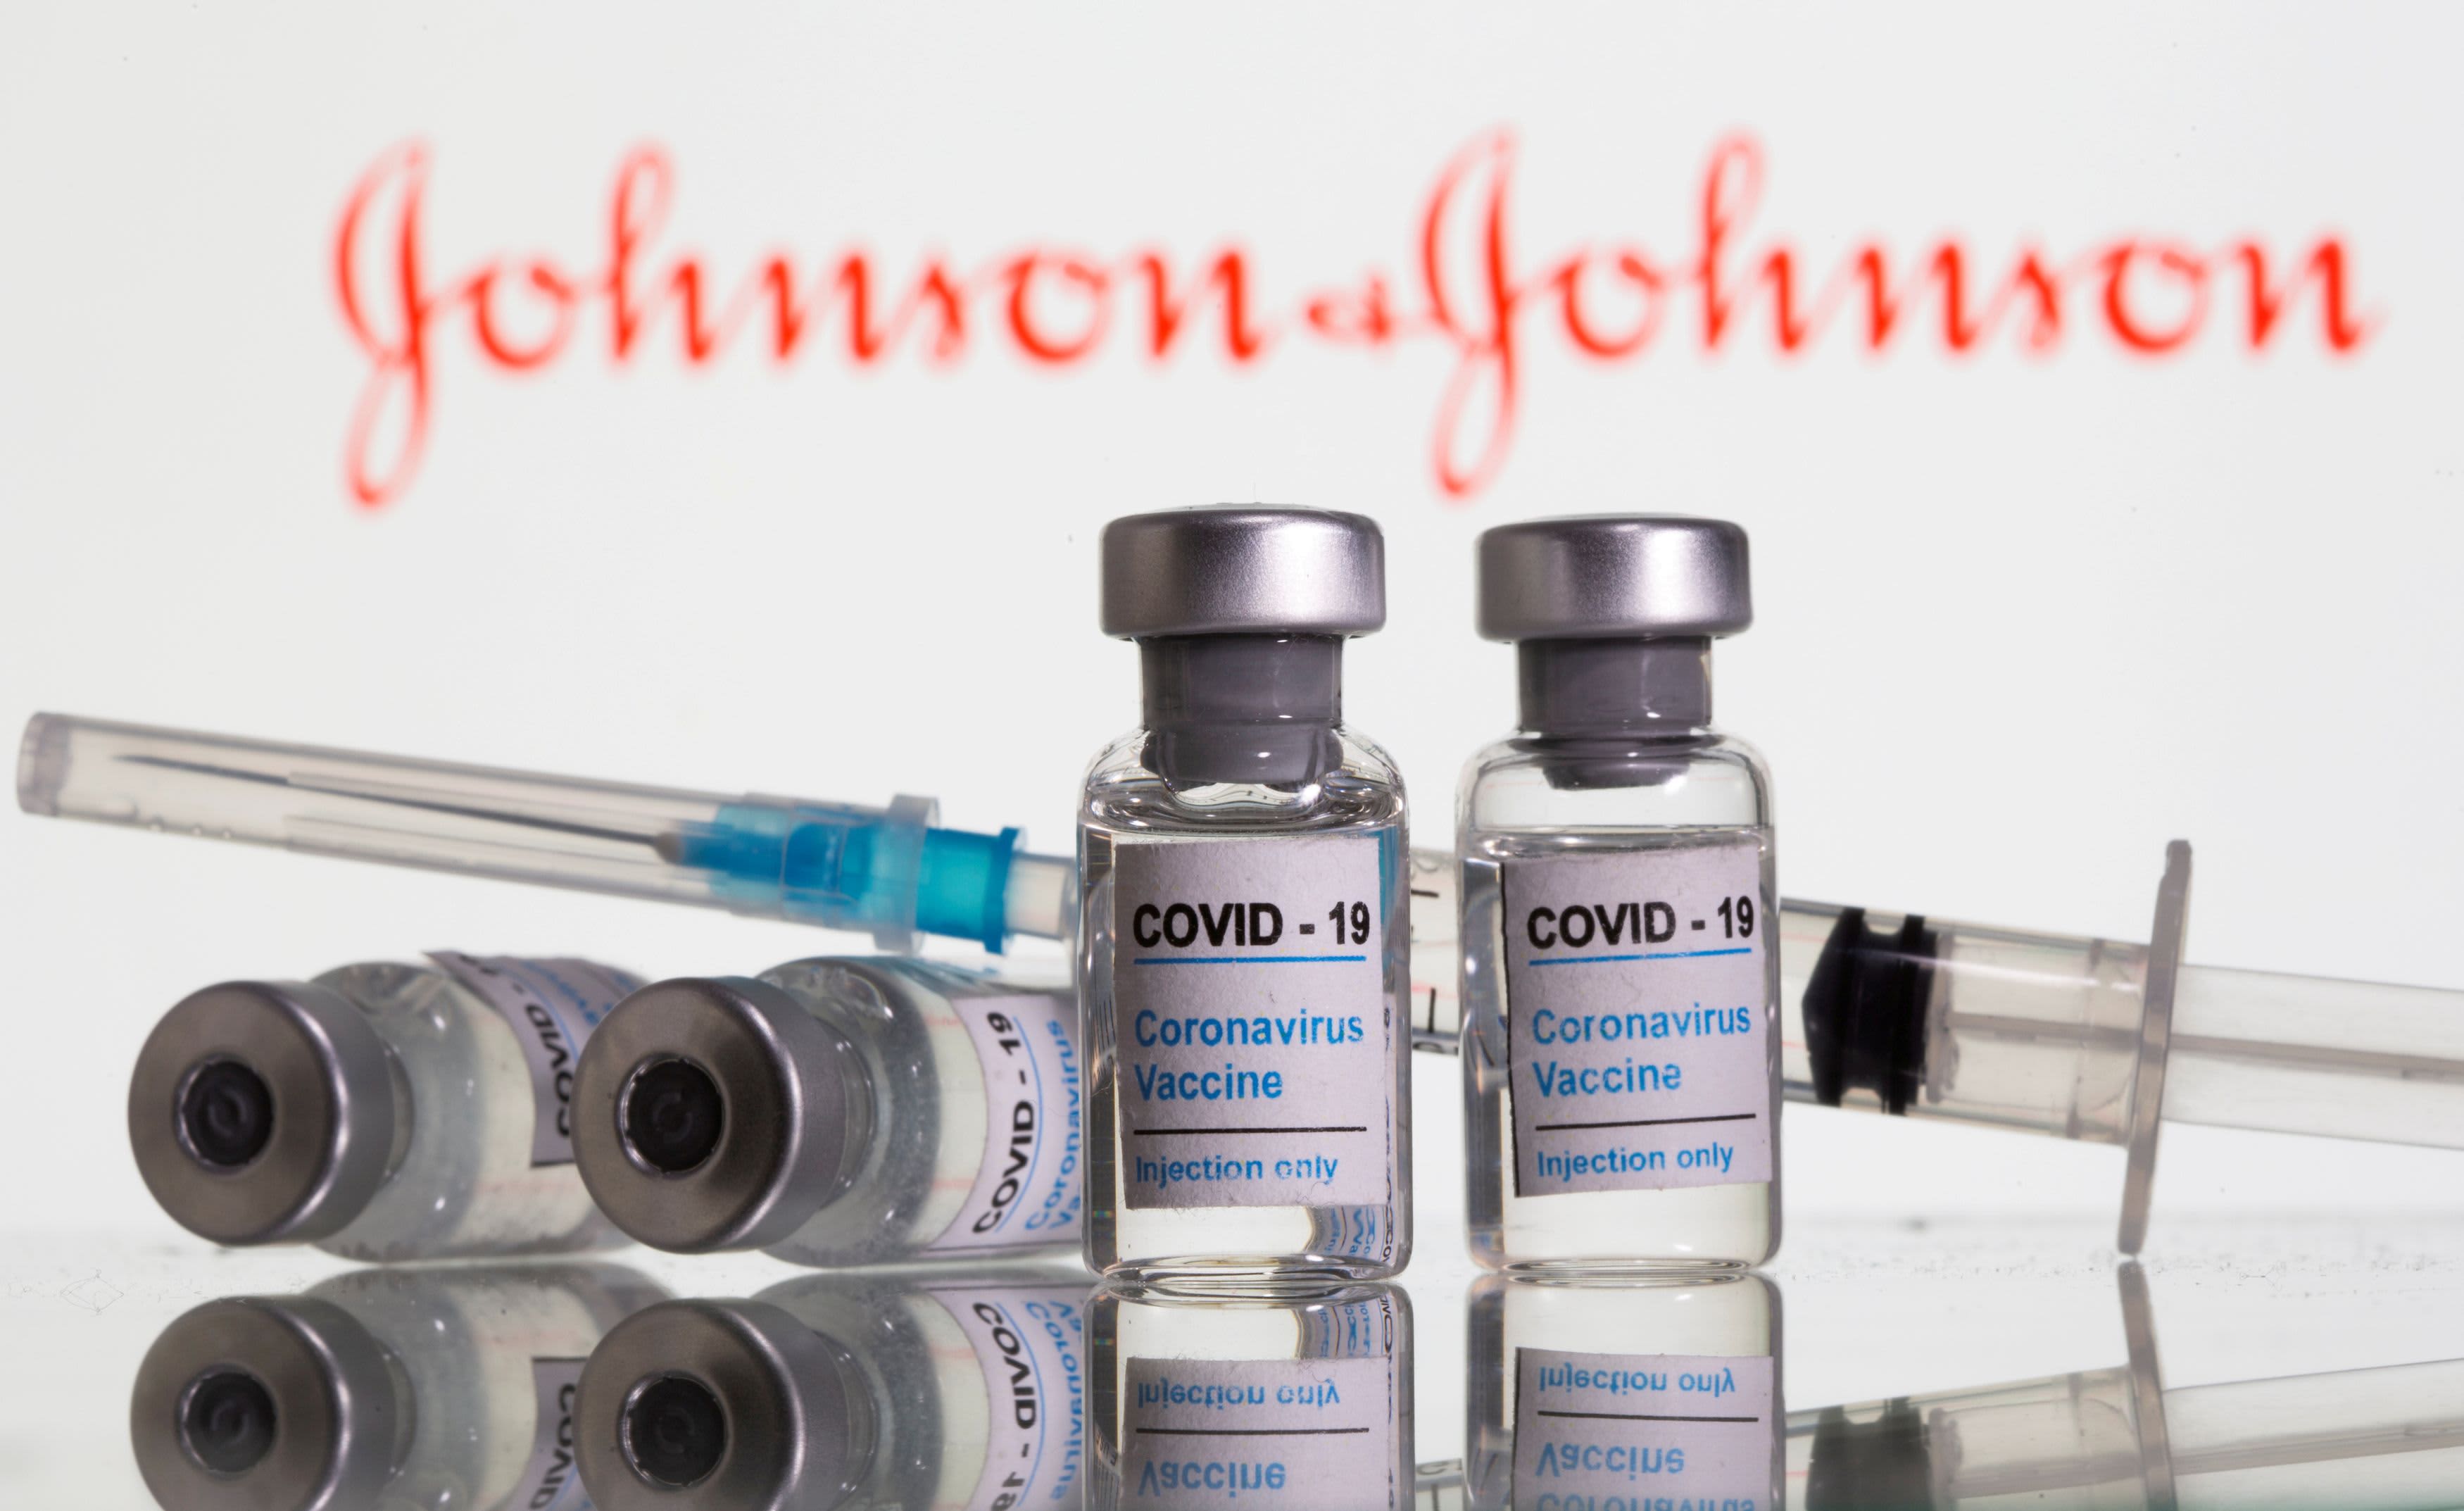 Vials labelled "COVID-19 Coronavirus Vaccine" and syringe are seen in front of displayed Johnson & Johnson logo in this illustration taken, February 9, 2021.